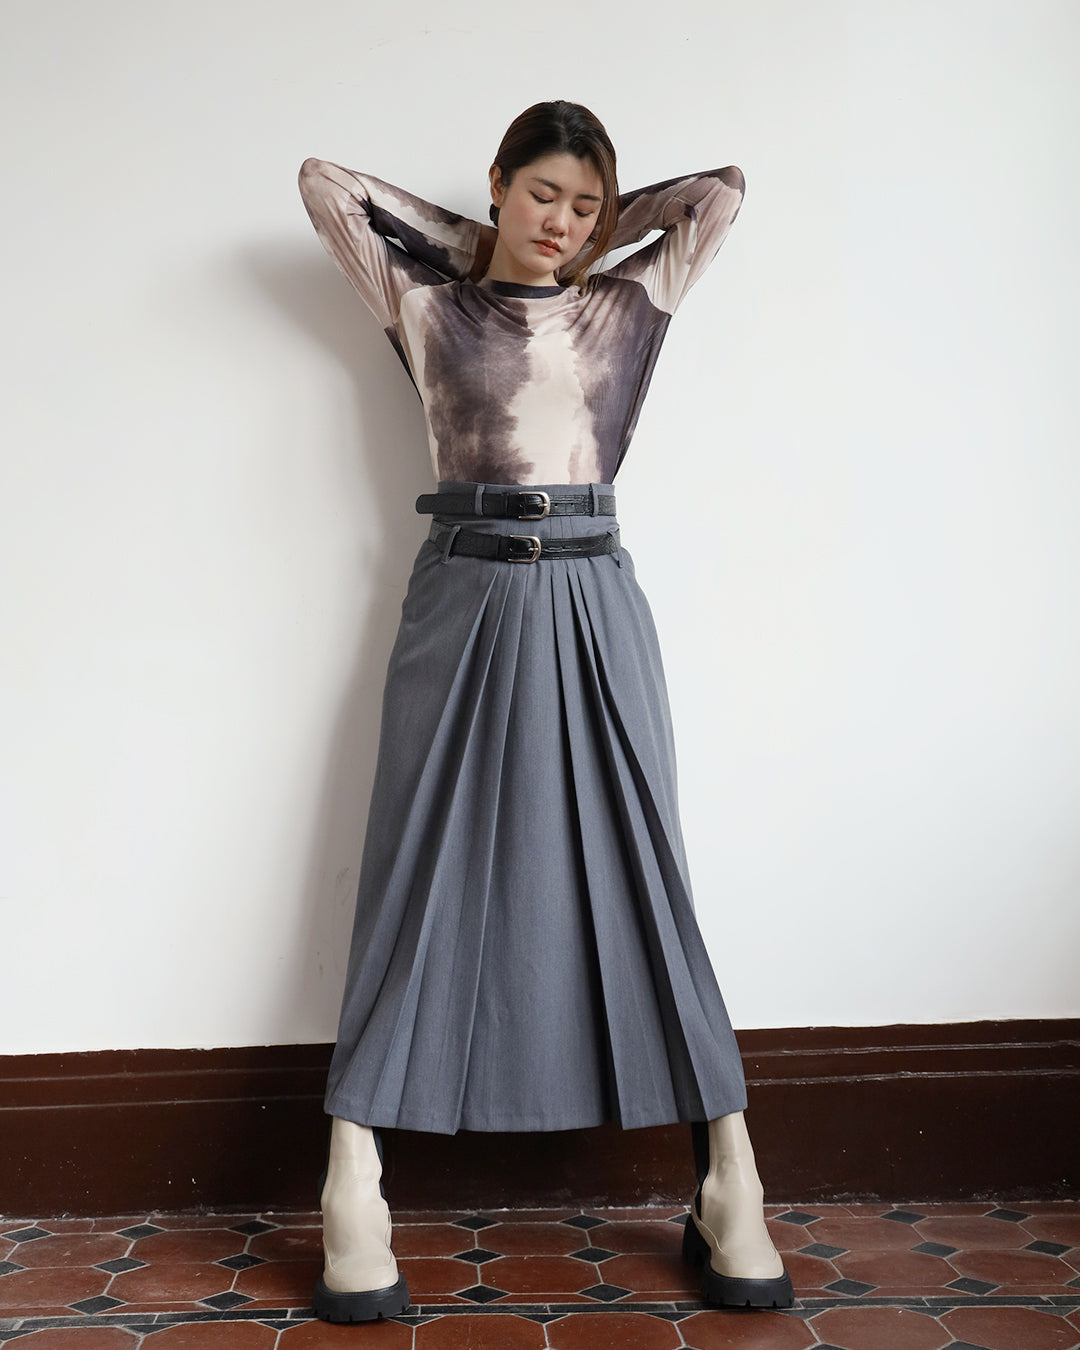 Front Pleated Skirt